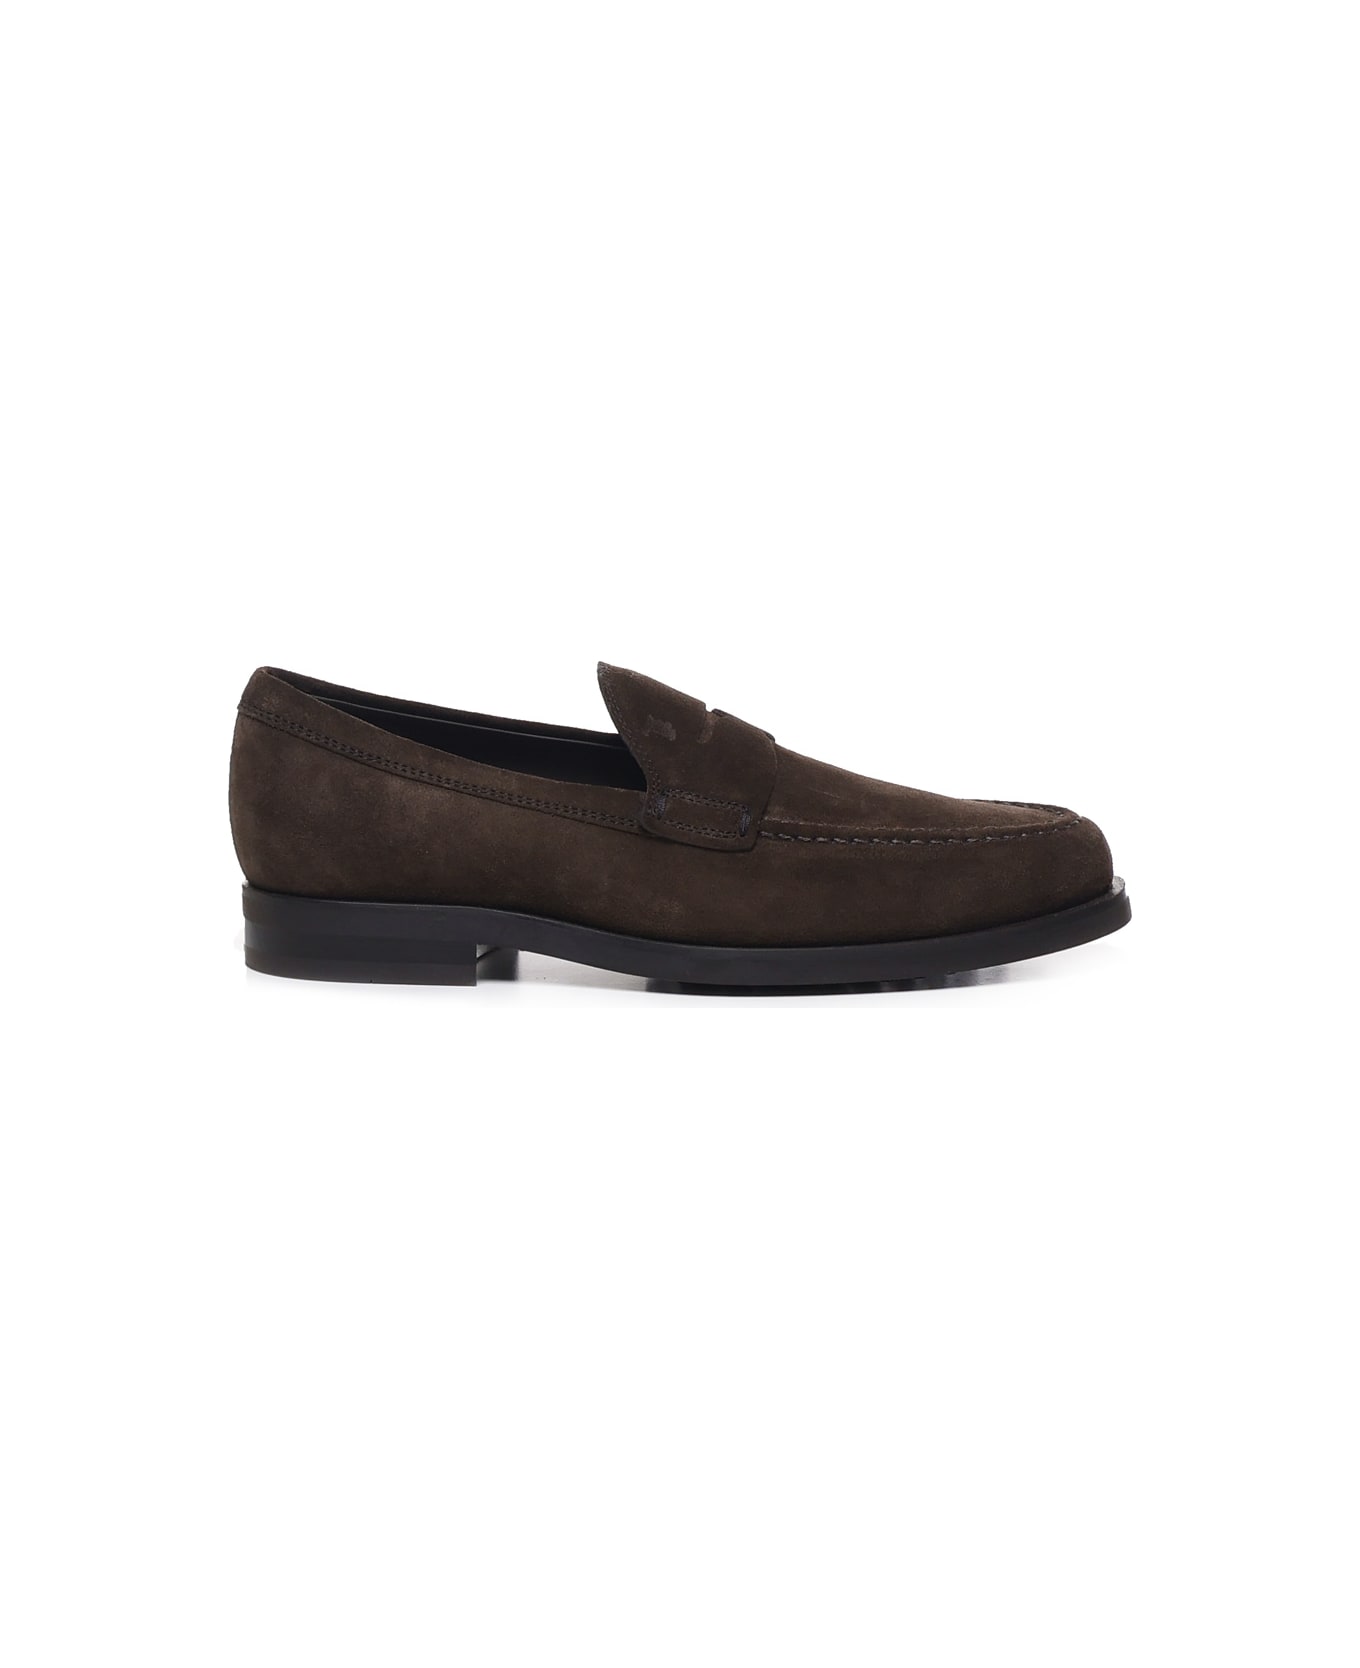 Tod's Brown Suede Loafers - DARK BROWN